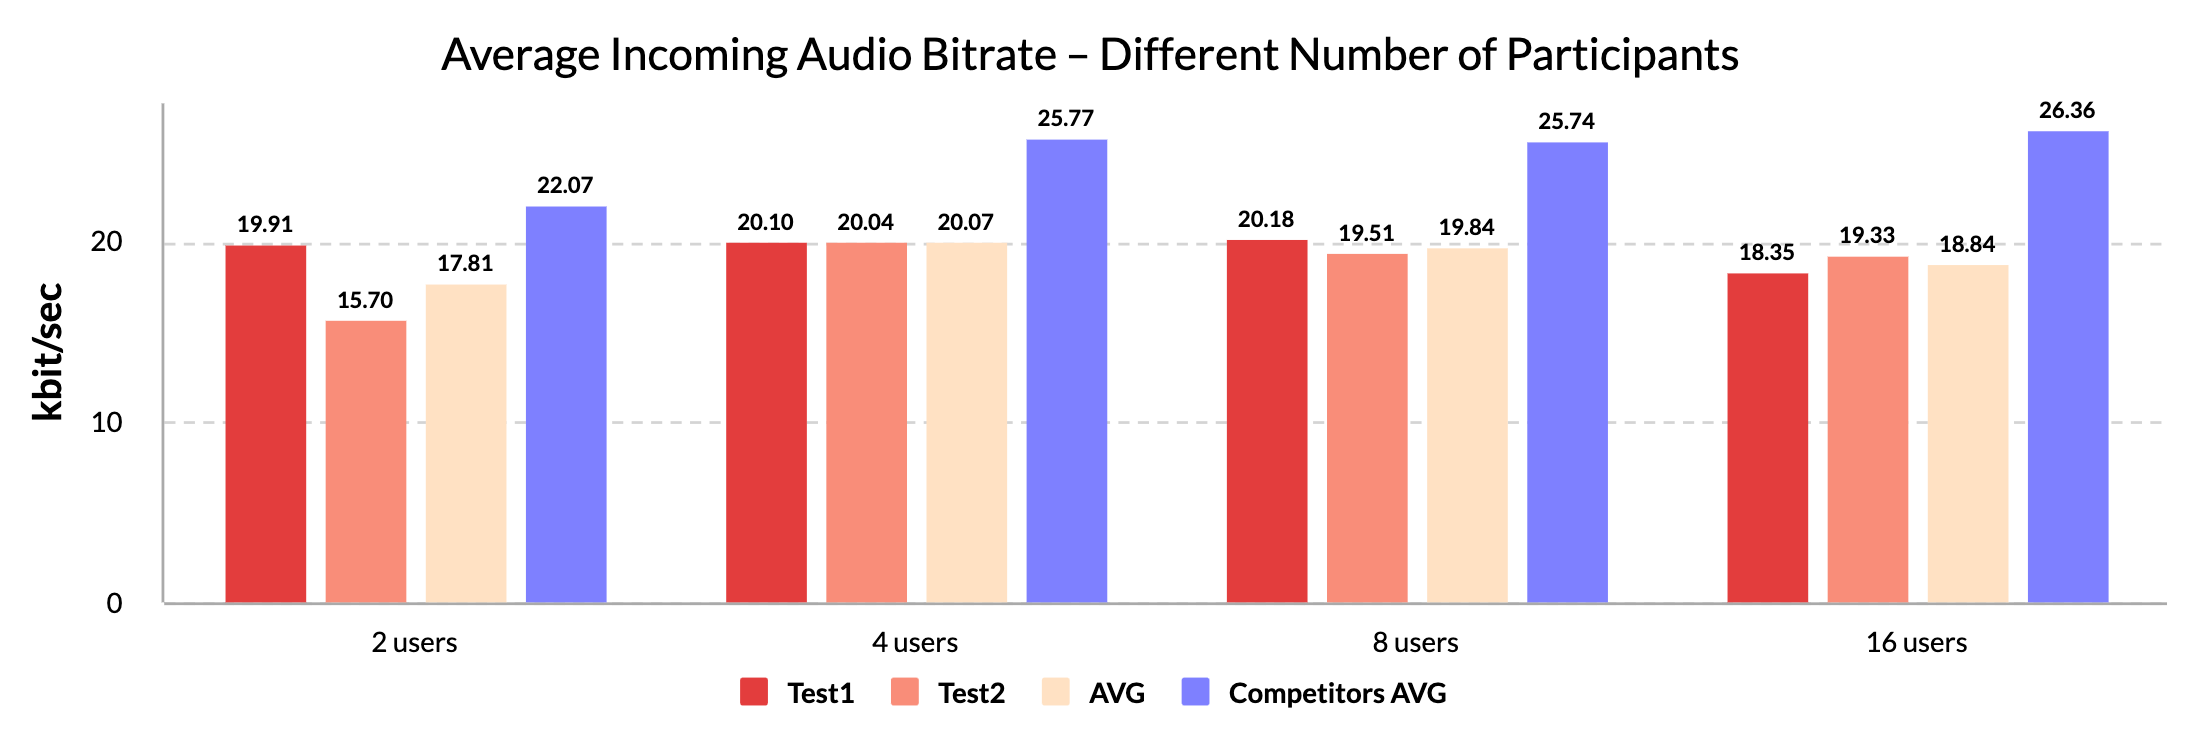 Average Incoming Audio Bitrate - Different Number of Participants